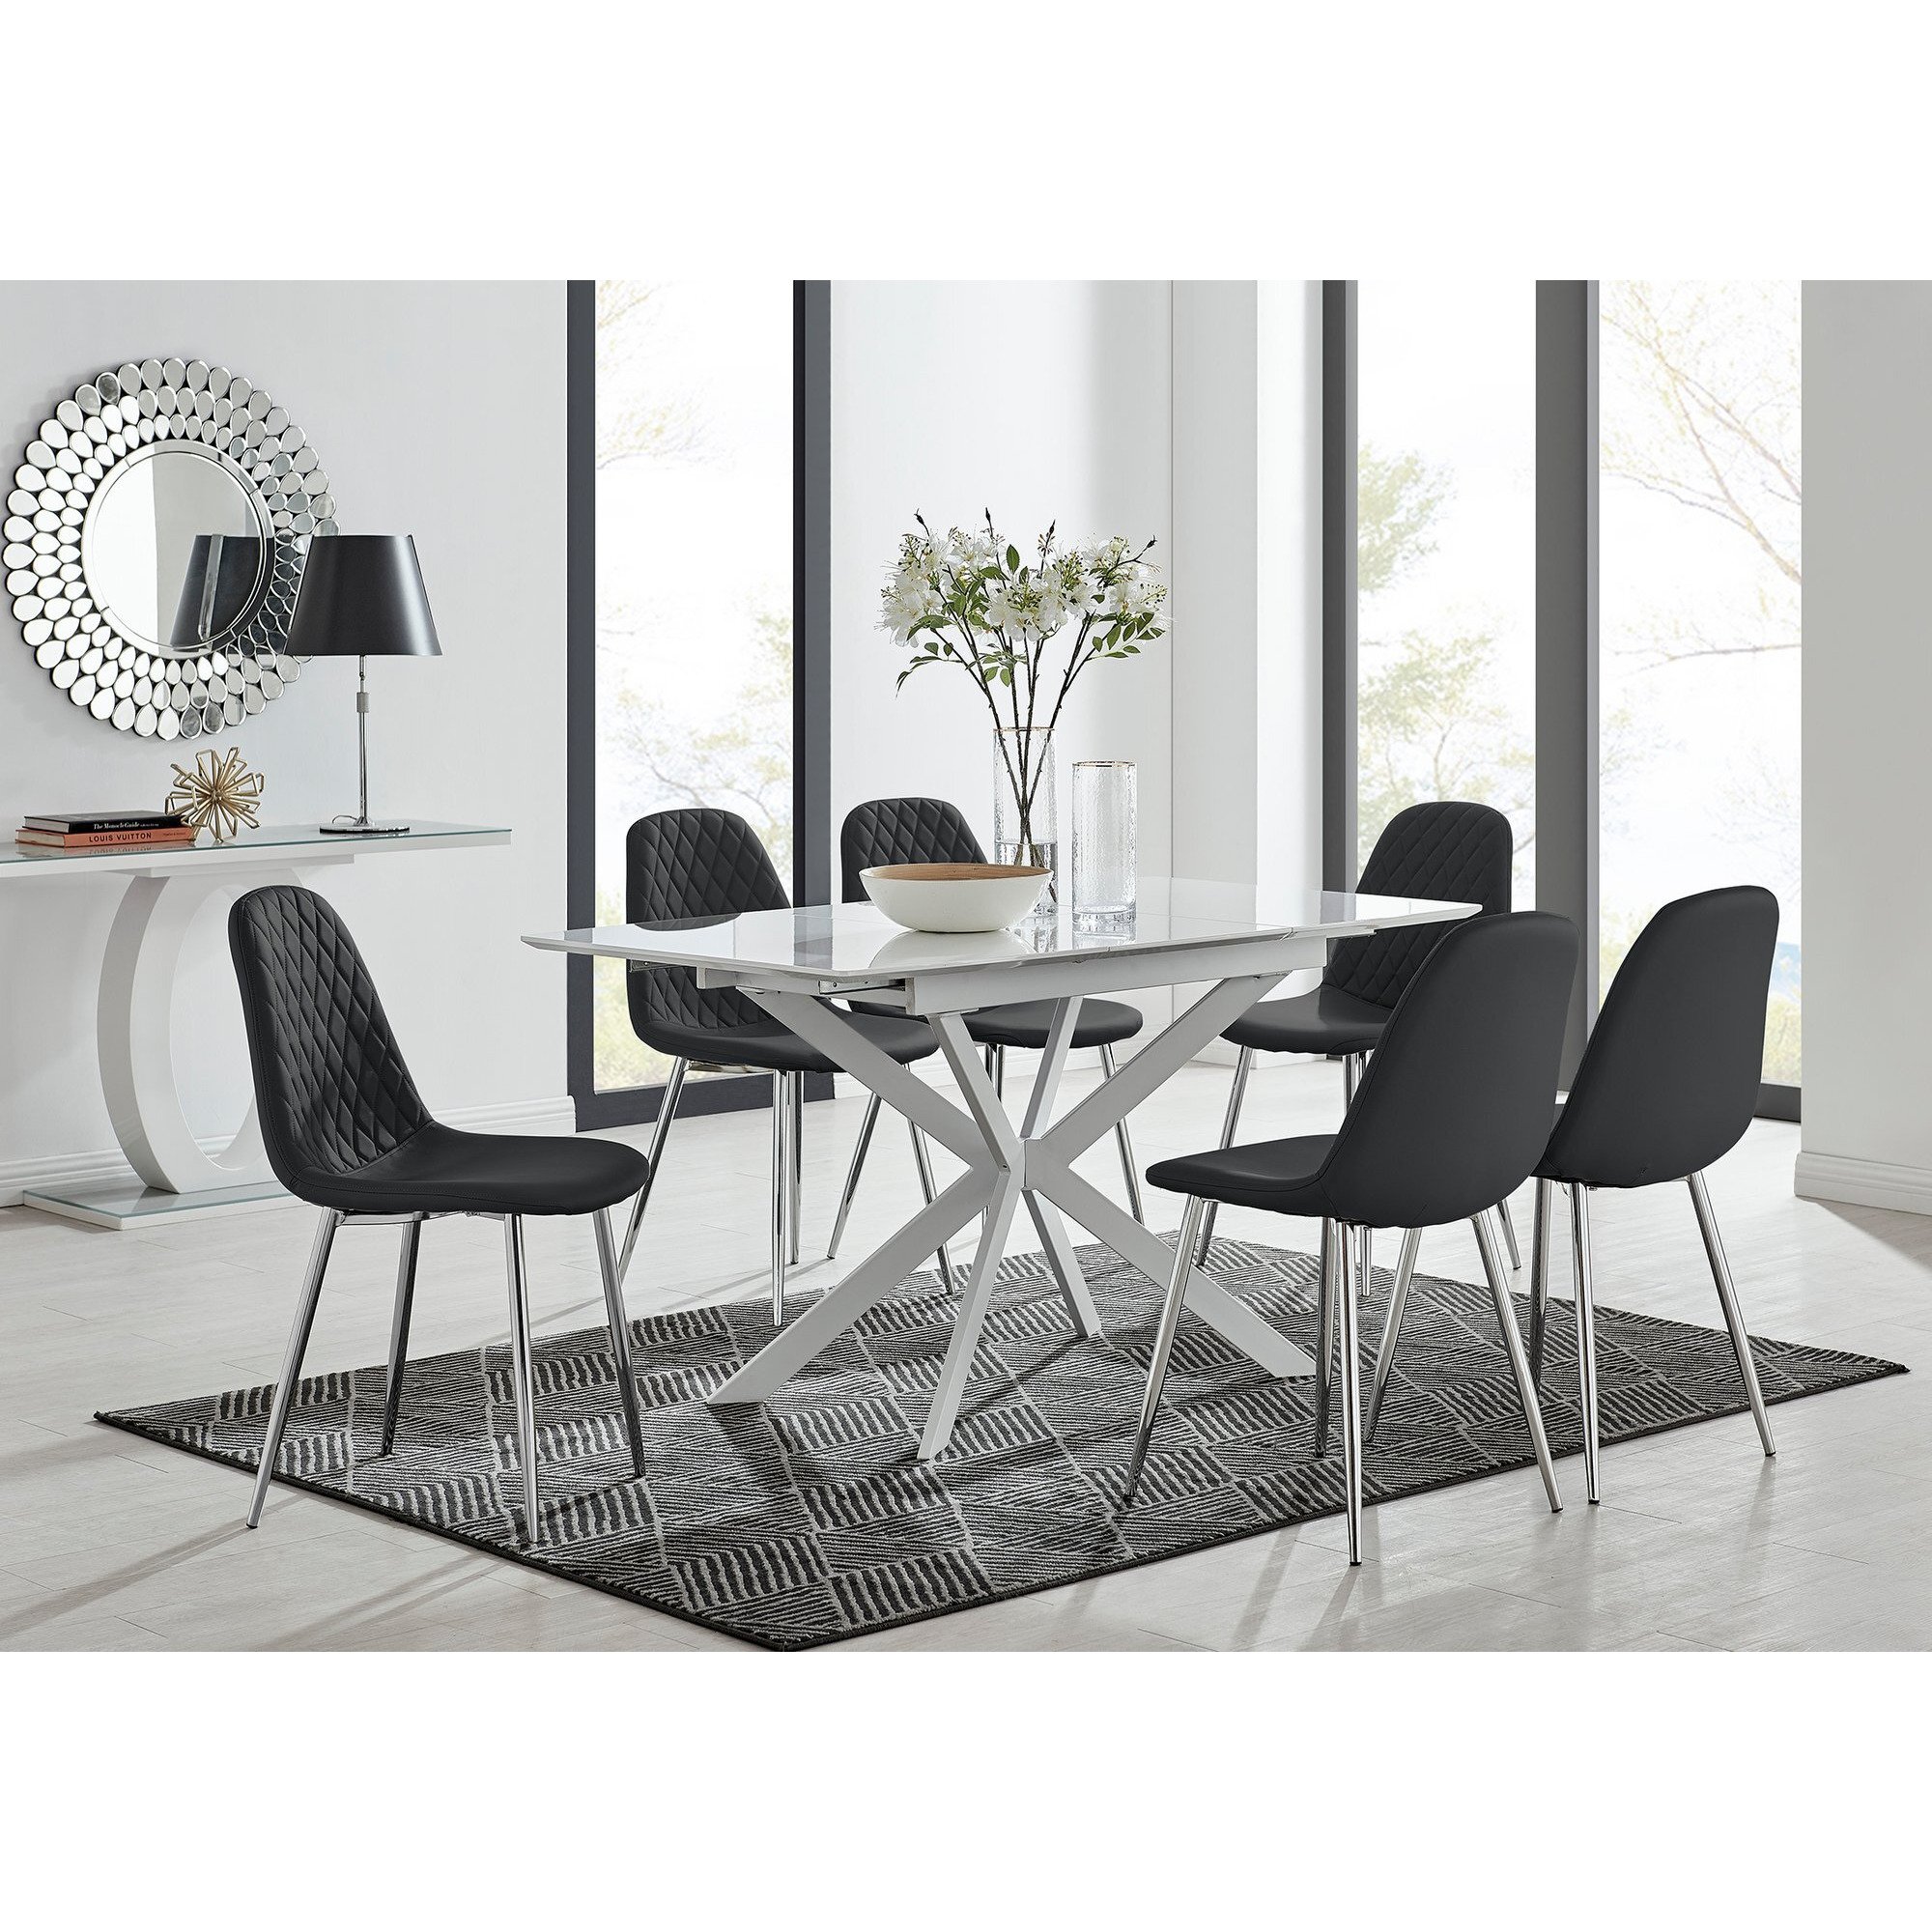 Lira 120 Extending Dining Table and 6 Corona Silver Leg Chairs